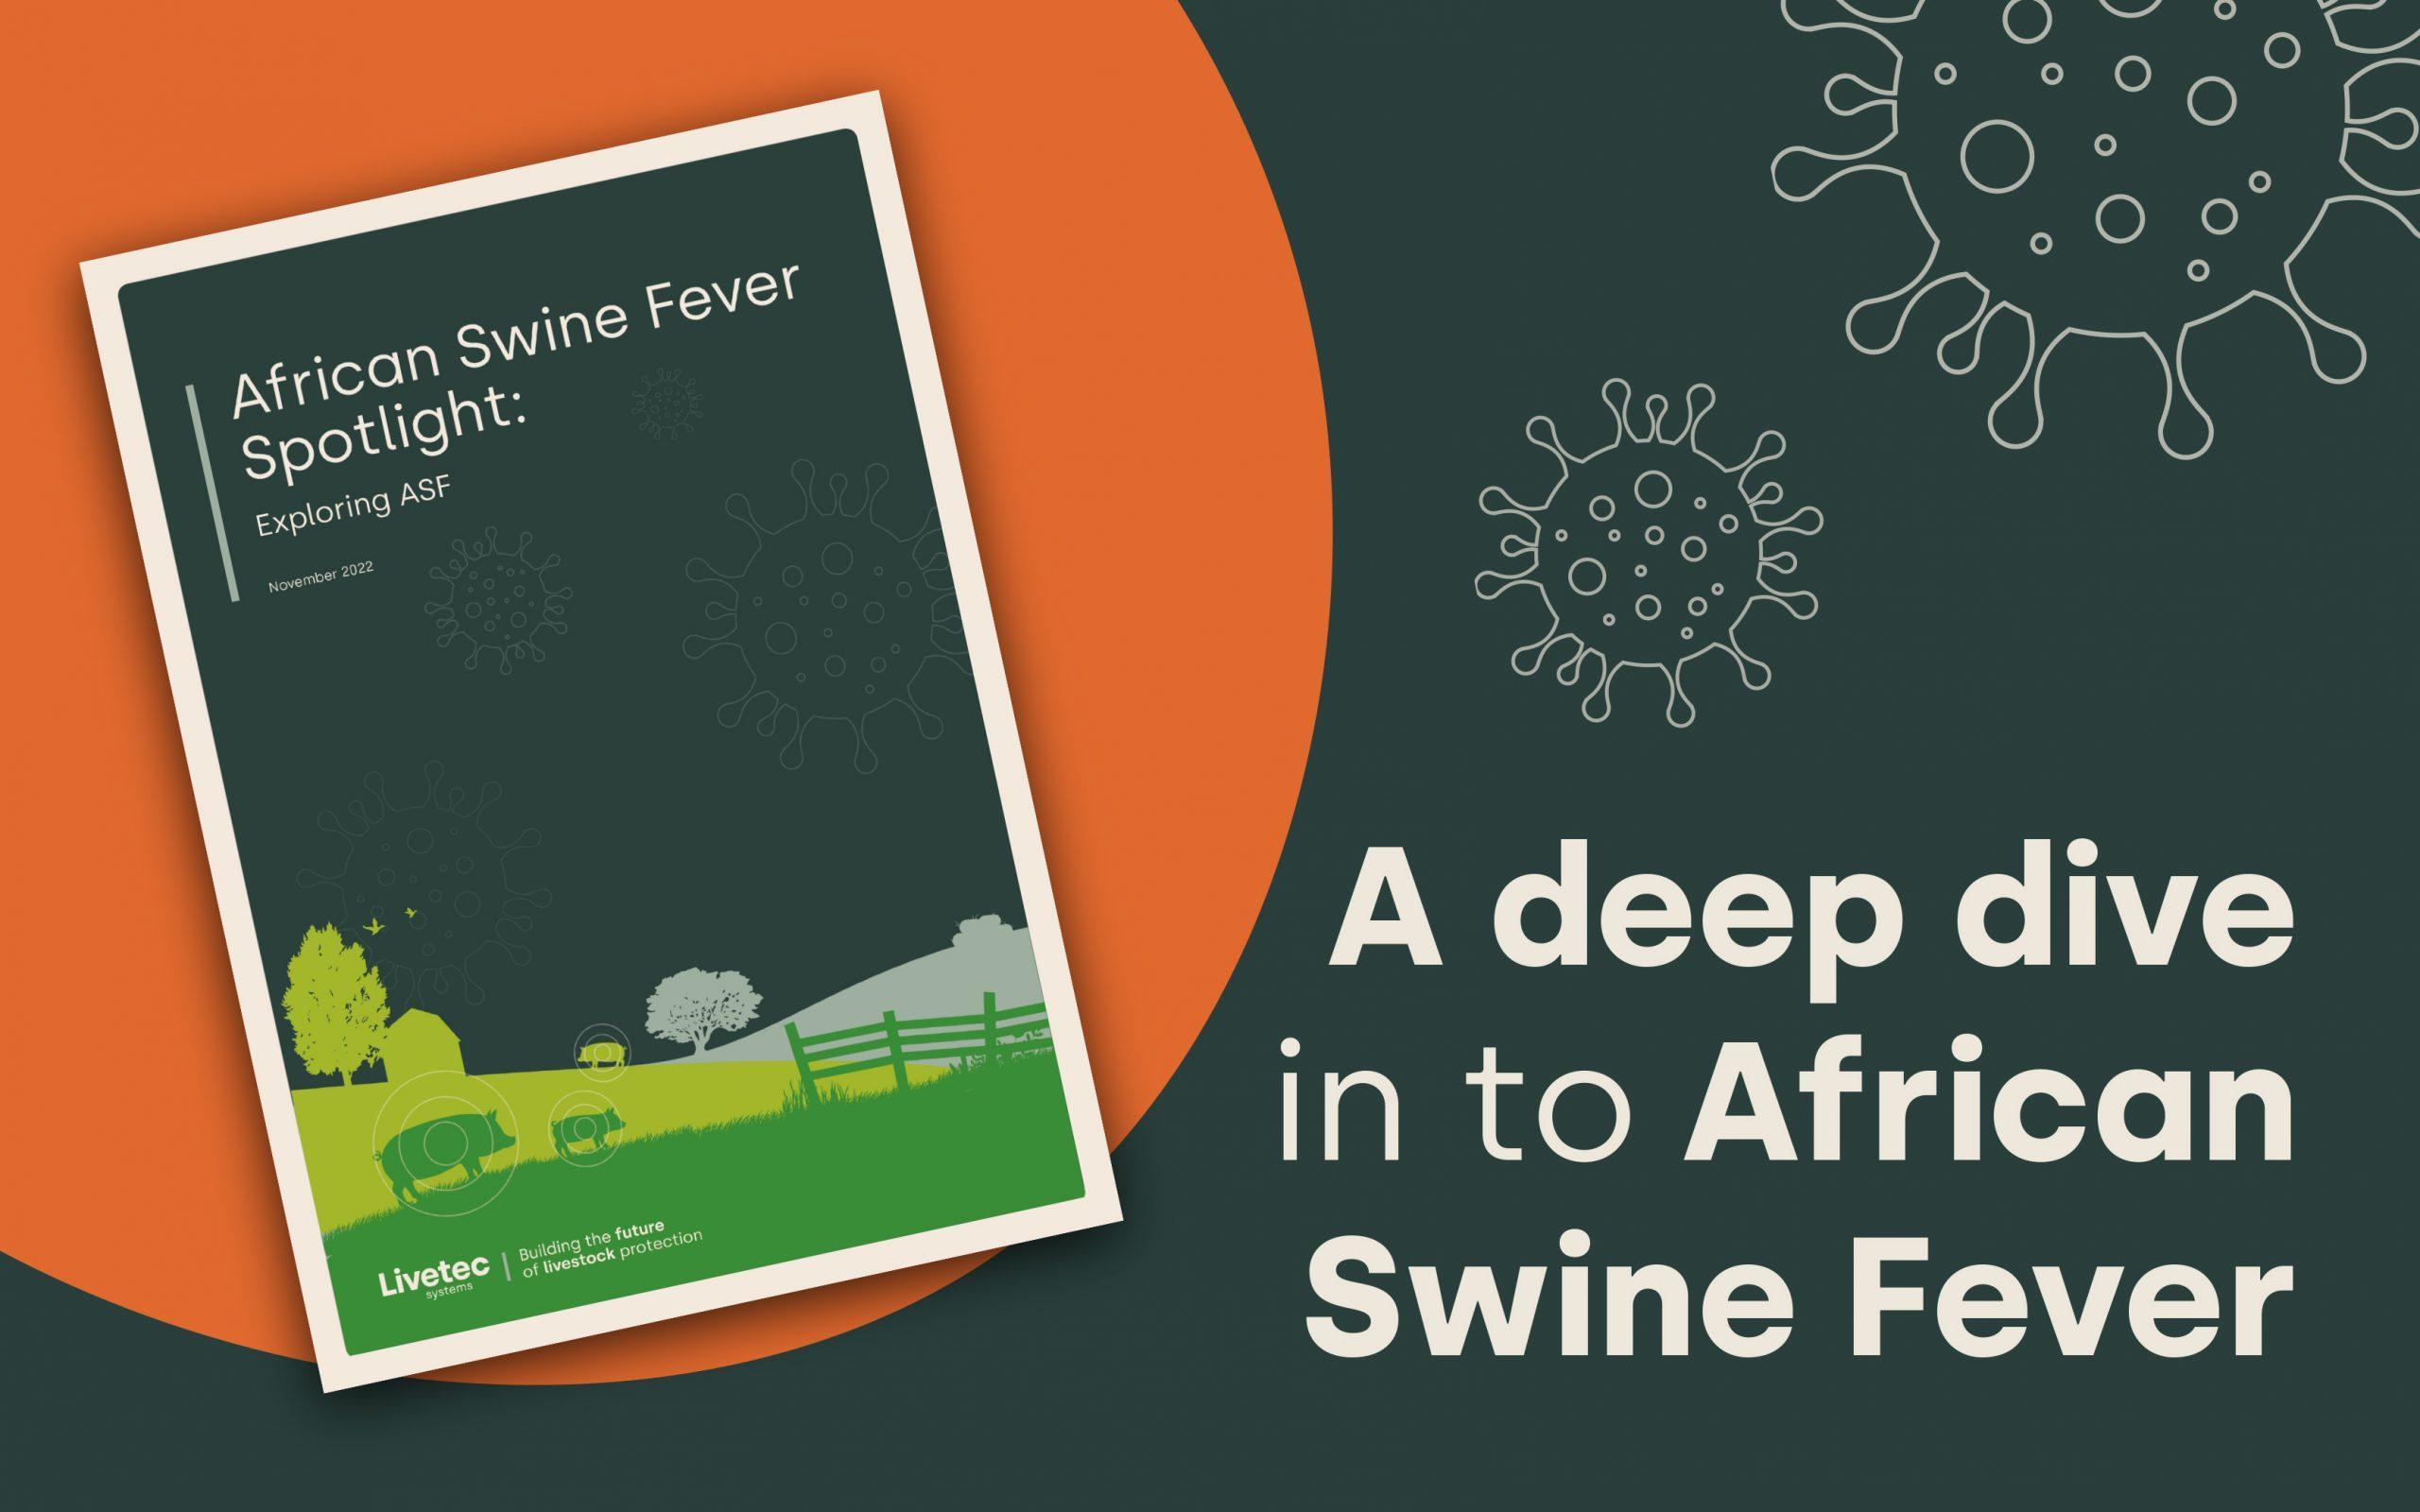 A deep dive into African Swine Fever